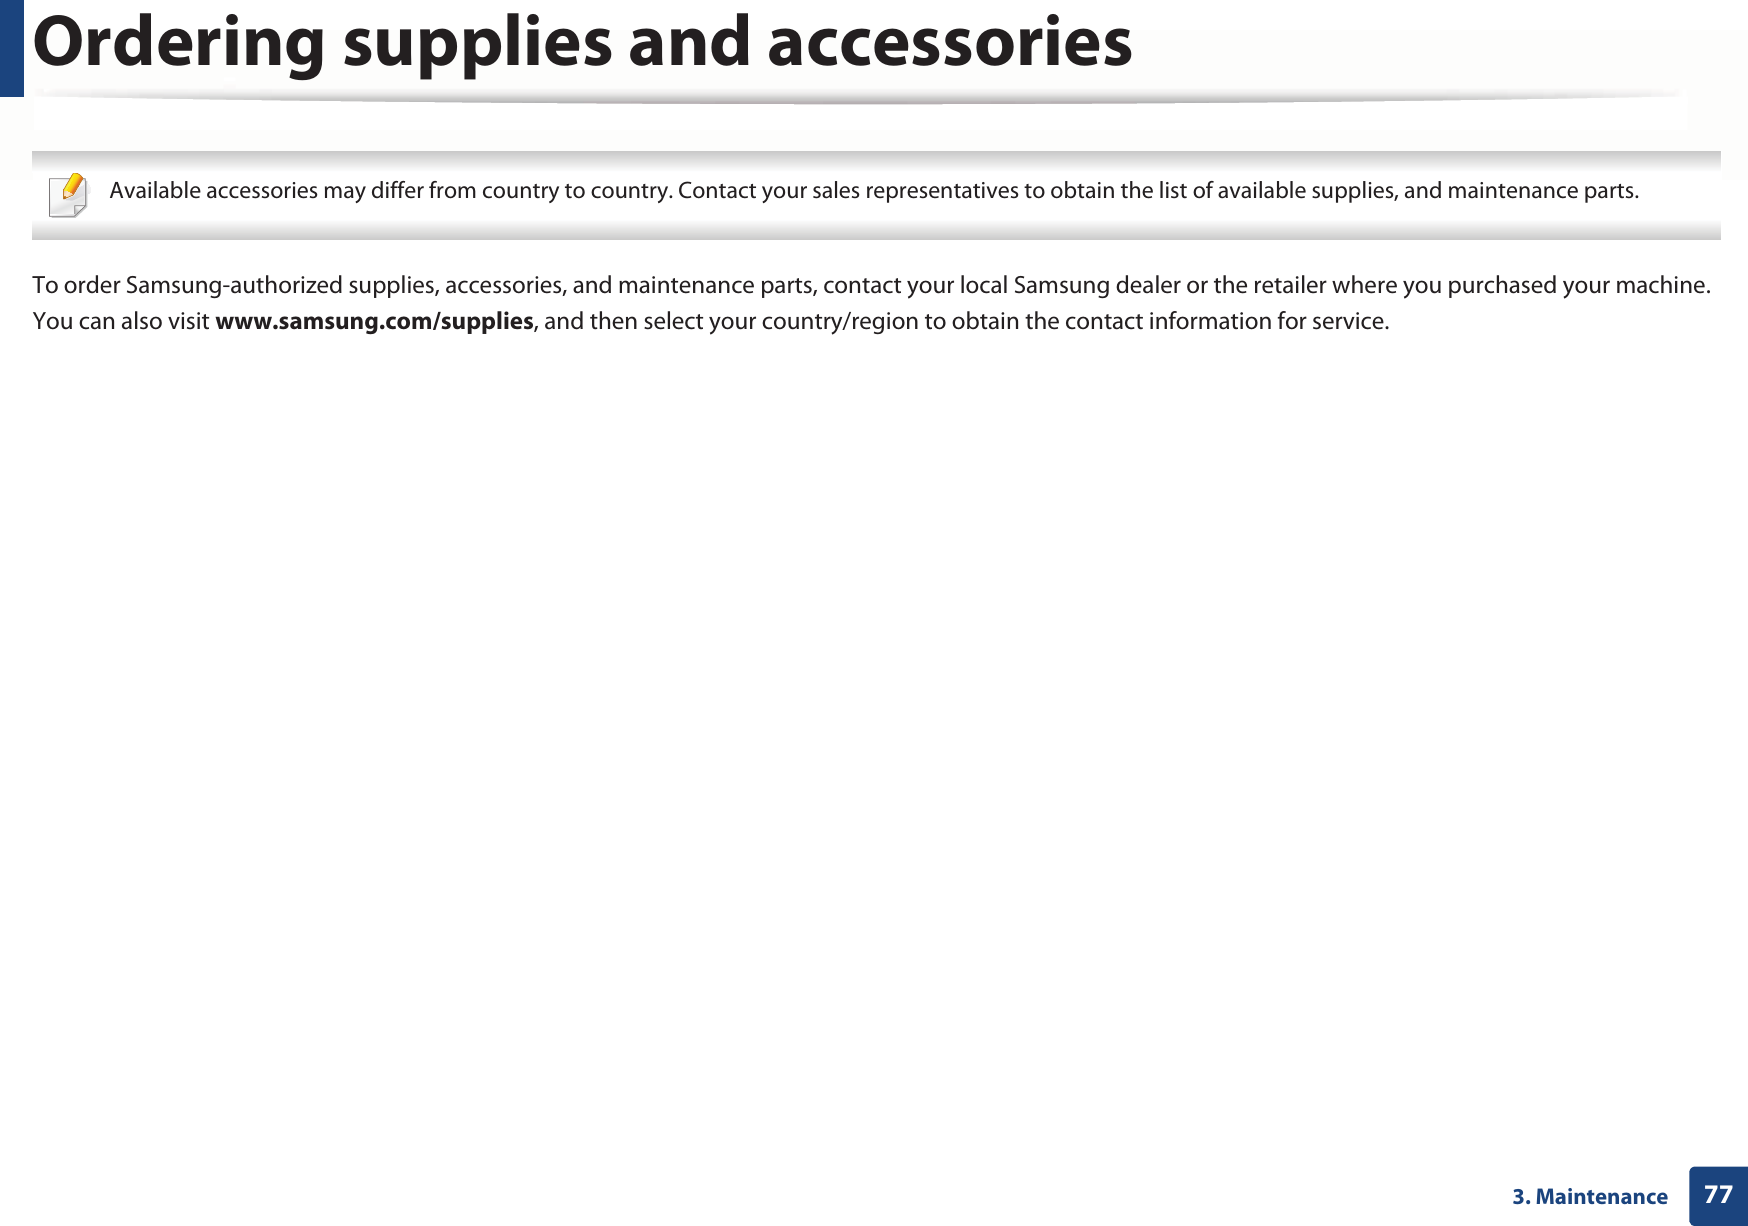 773. MaintenanceOrdering supplies and accessories Available accessories may differ from country to country. Contact your sales representatives to obtain the list of available supplies, and maintenance parts. To order Samsung-authorized supplies, accessories, and maintenance parts, contact your local Samsung dealer or the retailer where you purchased your machine. You can also visit www.samsung.com/supplies, and then select your country/region to obtain the contact information for service.